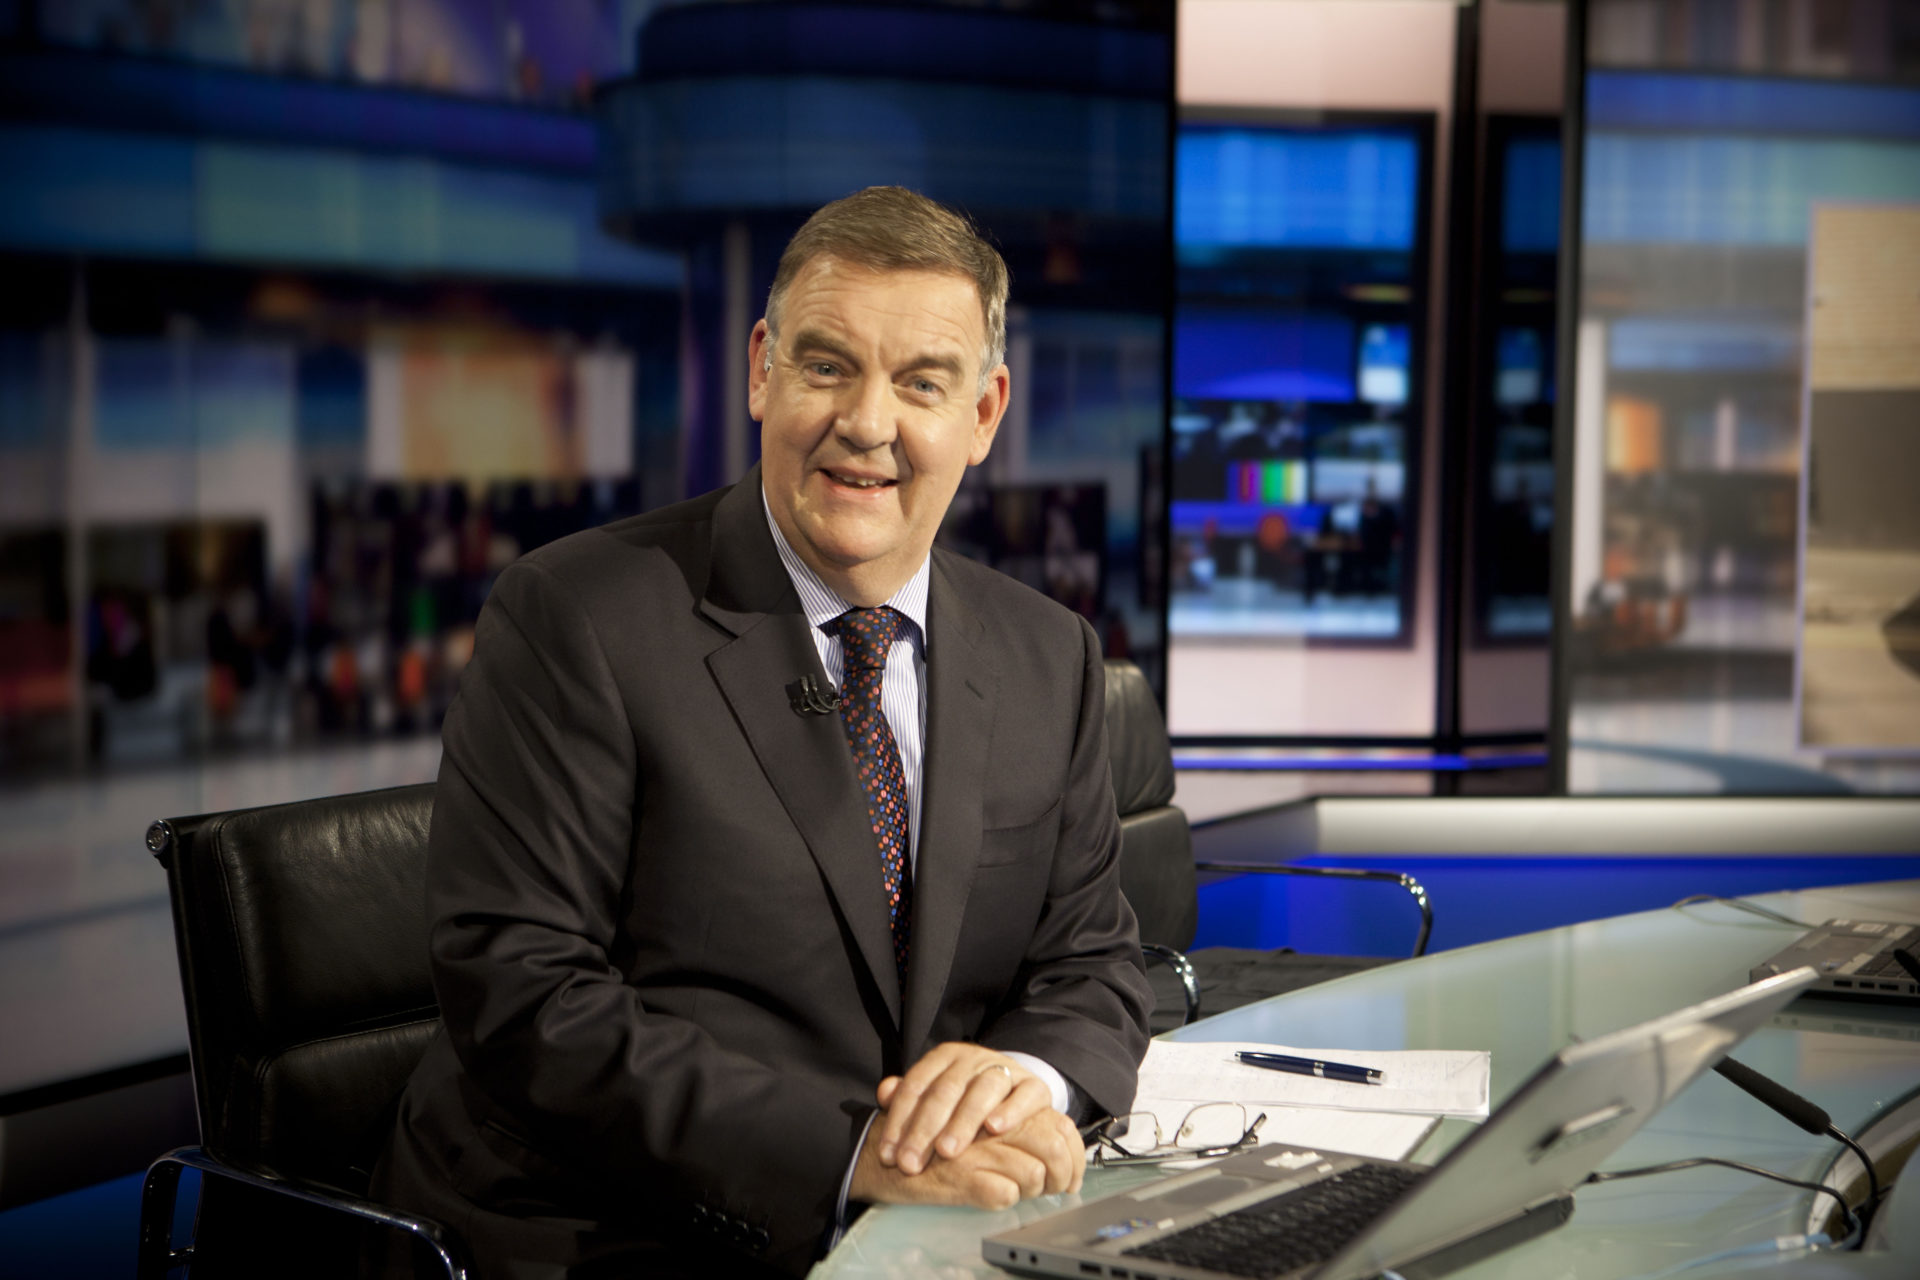 Bryan Dobson on his last day presenting the RTE Six One News after 21 years 25 October 2017